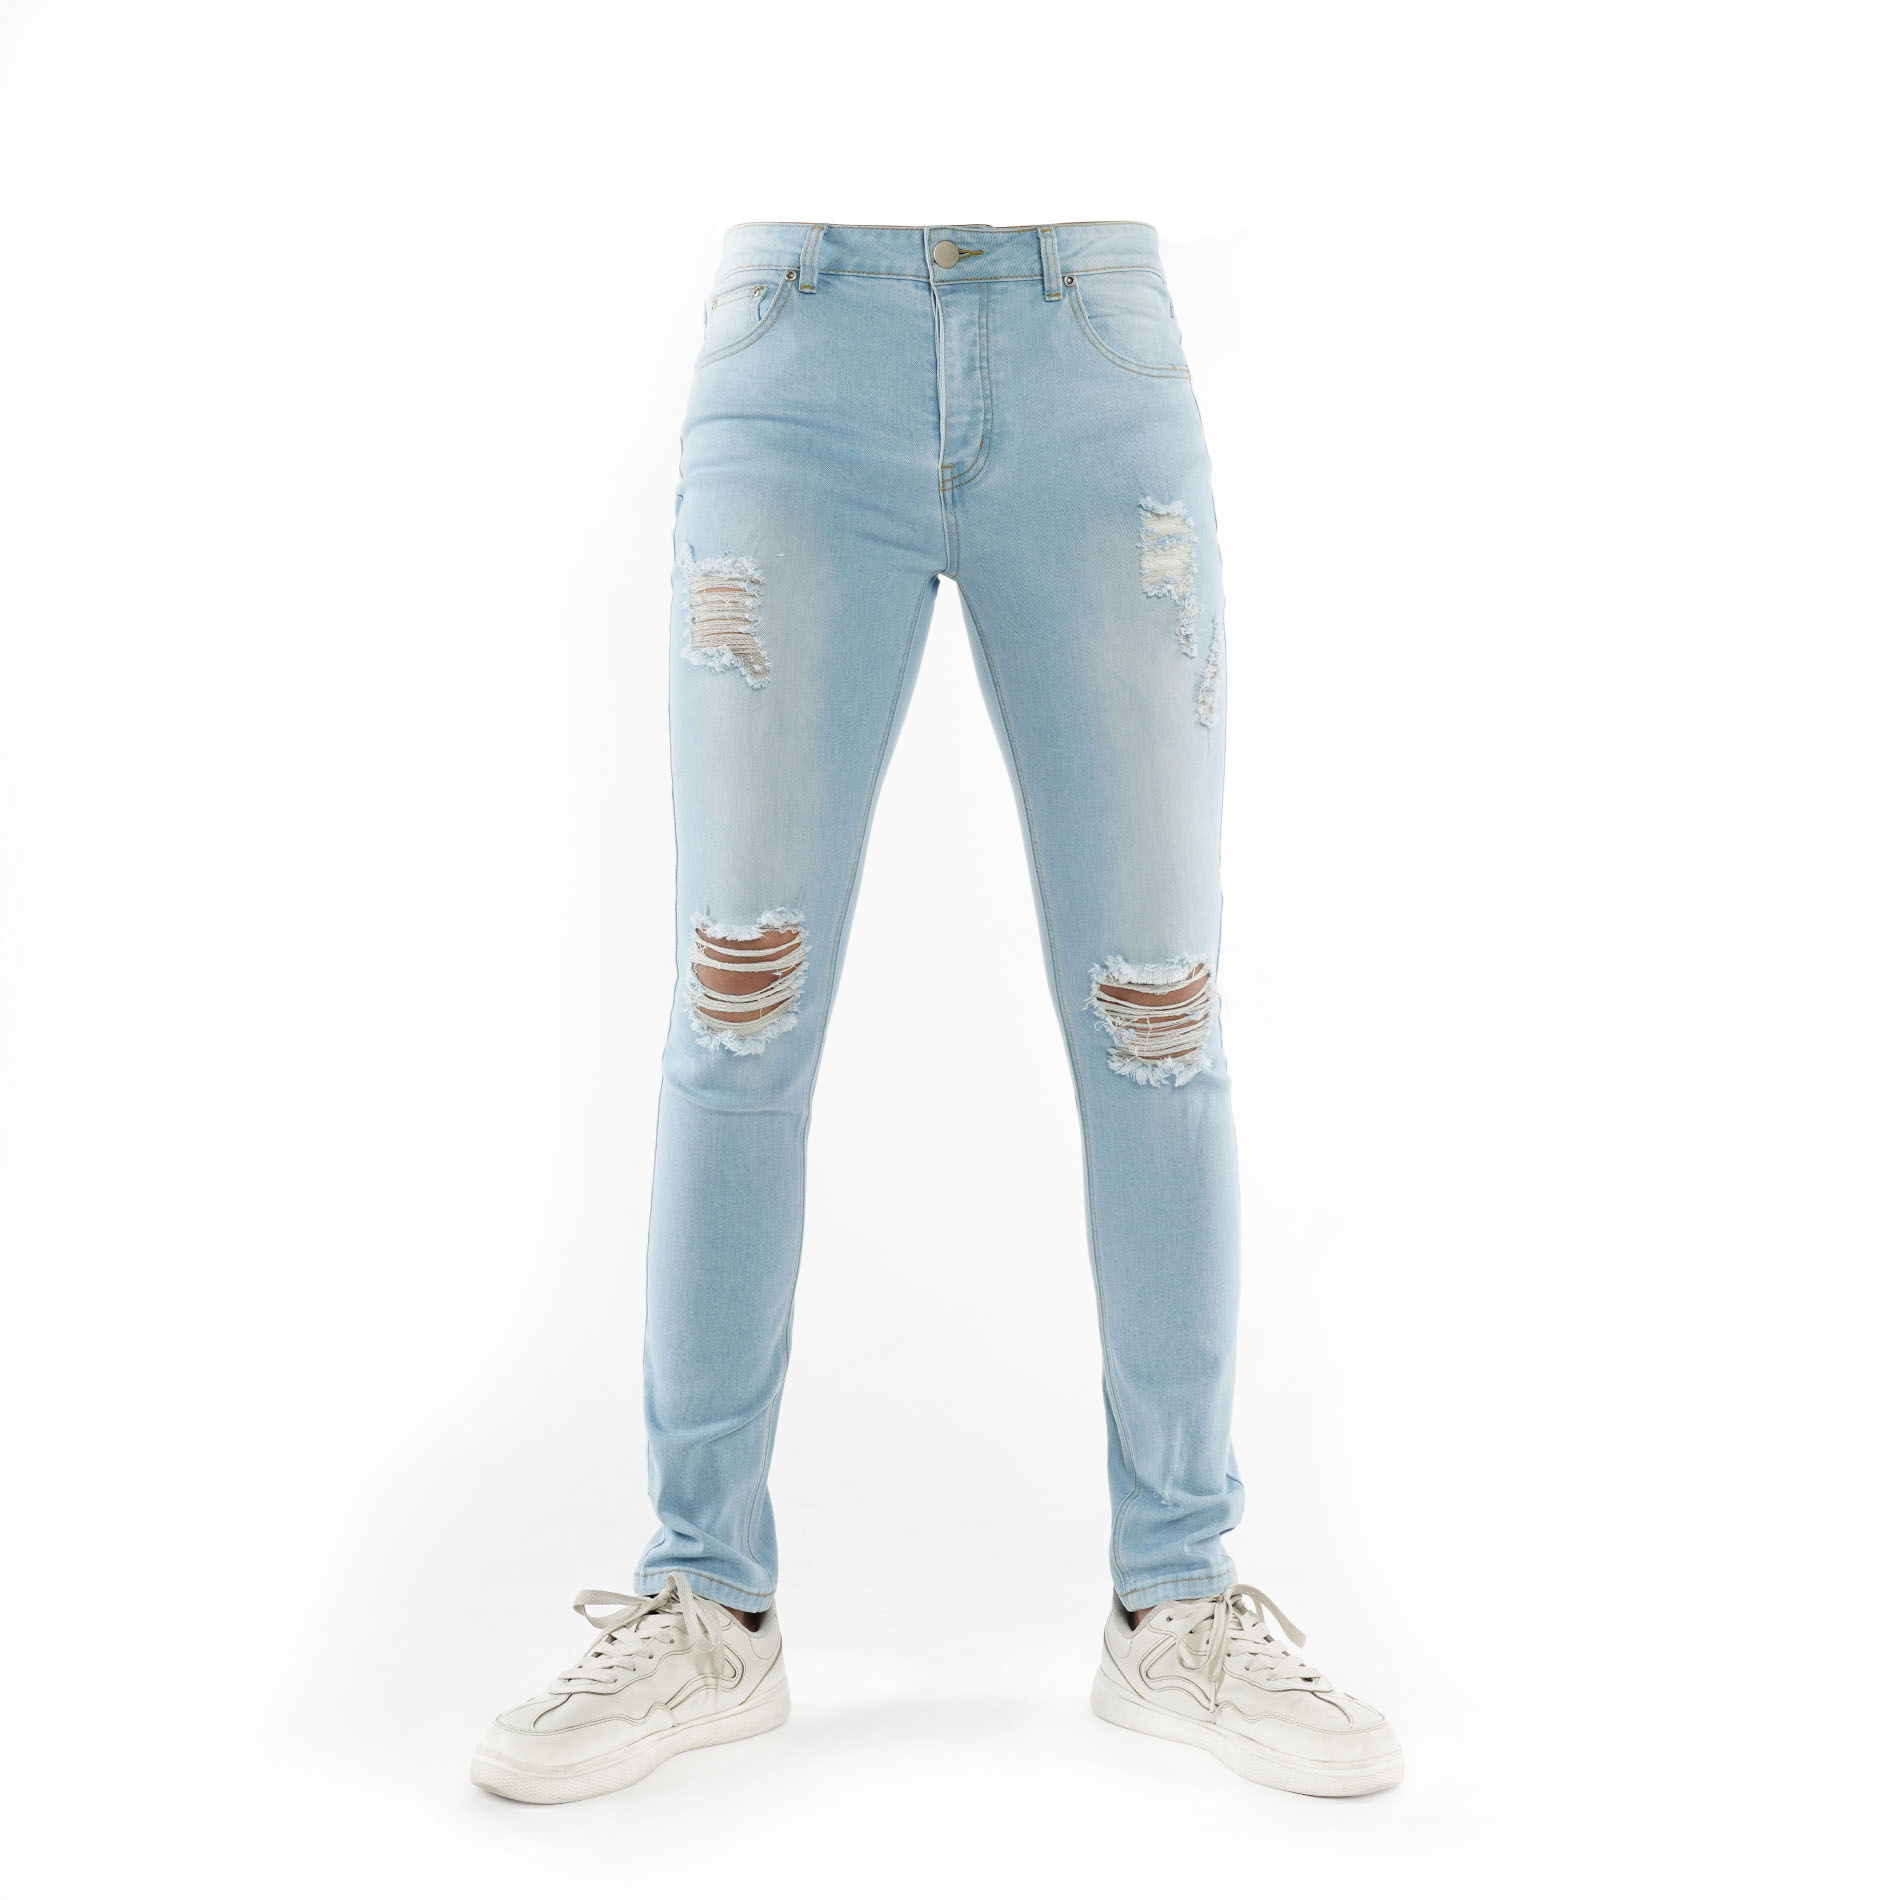 2020 new products light blue distressed denim jeans skinny jeans